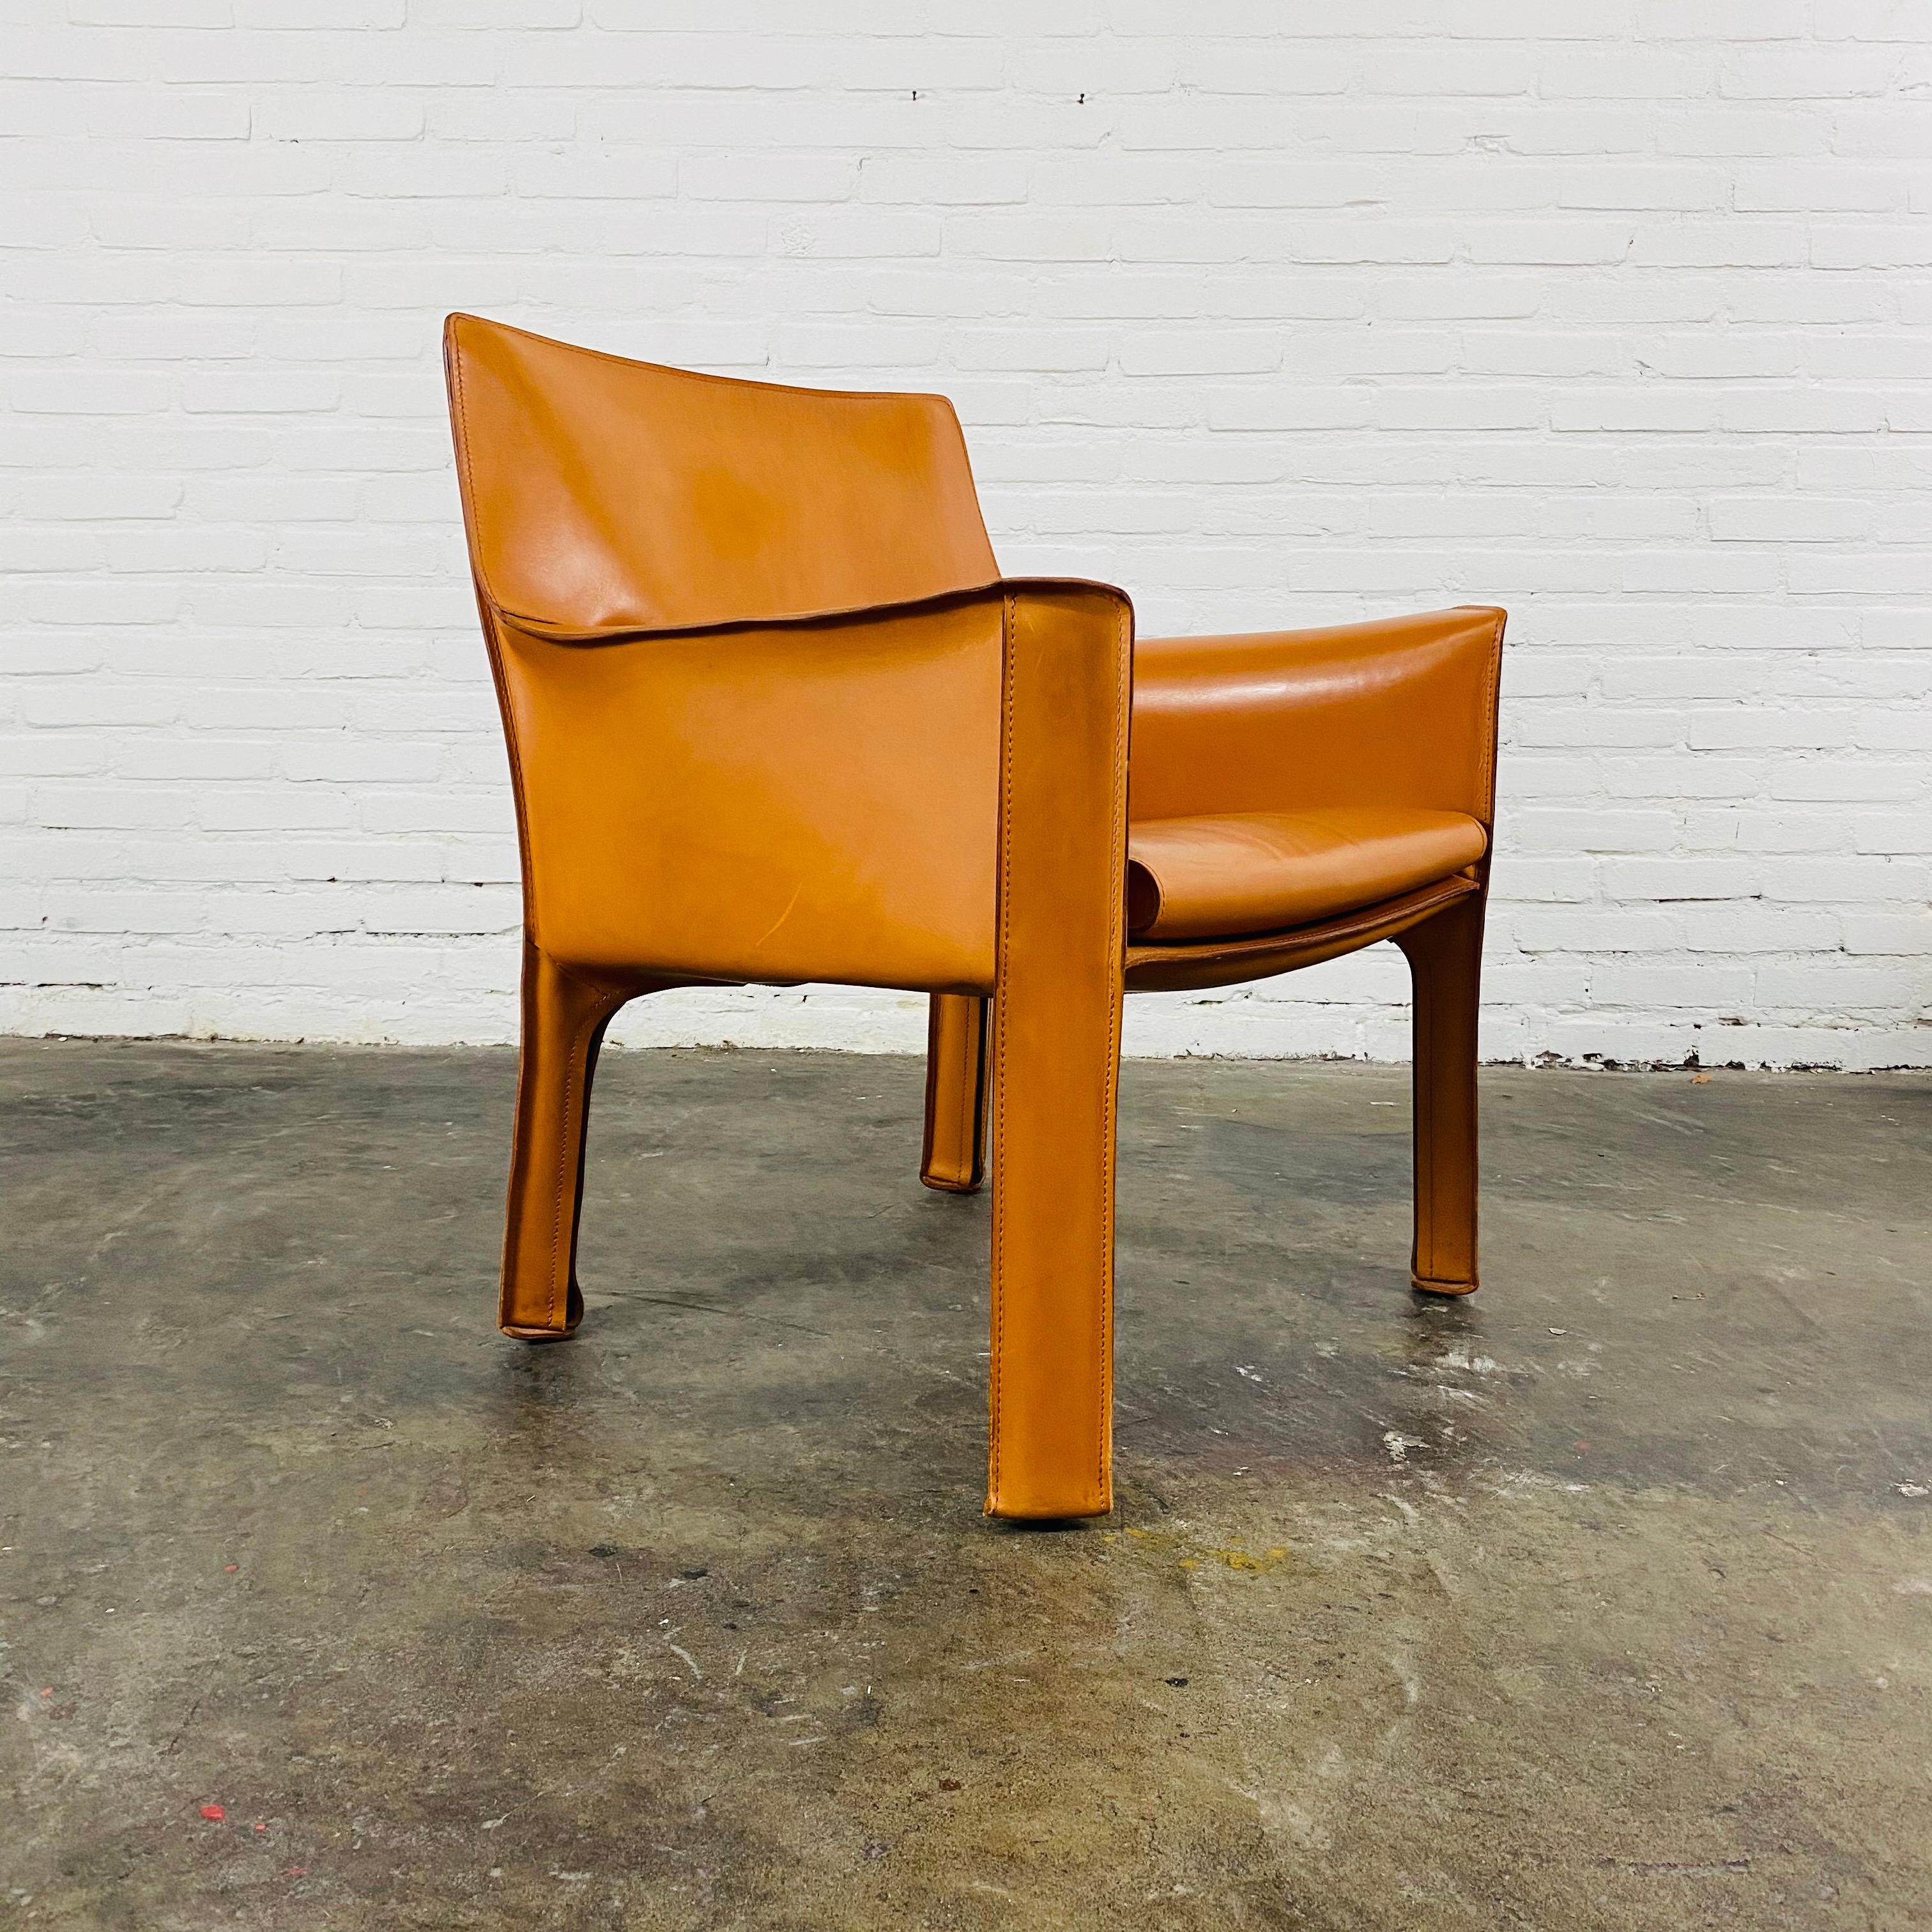 20th Century Vintage Italian Cab 414 Cognac Leather Chair by Mario Bellini for Cassina, 1970 